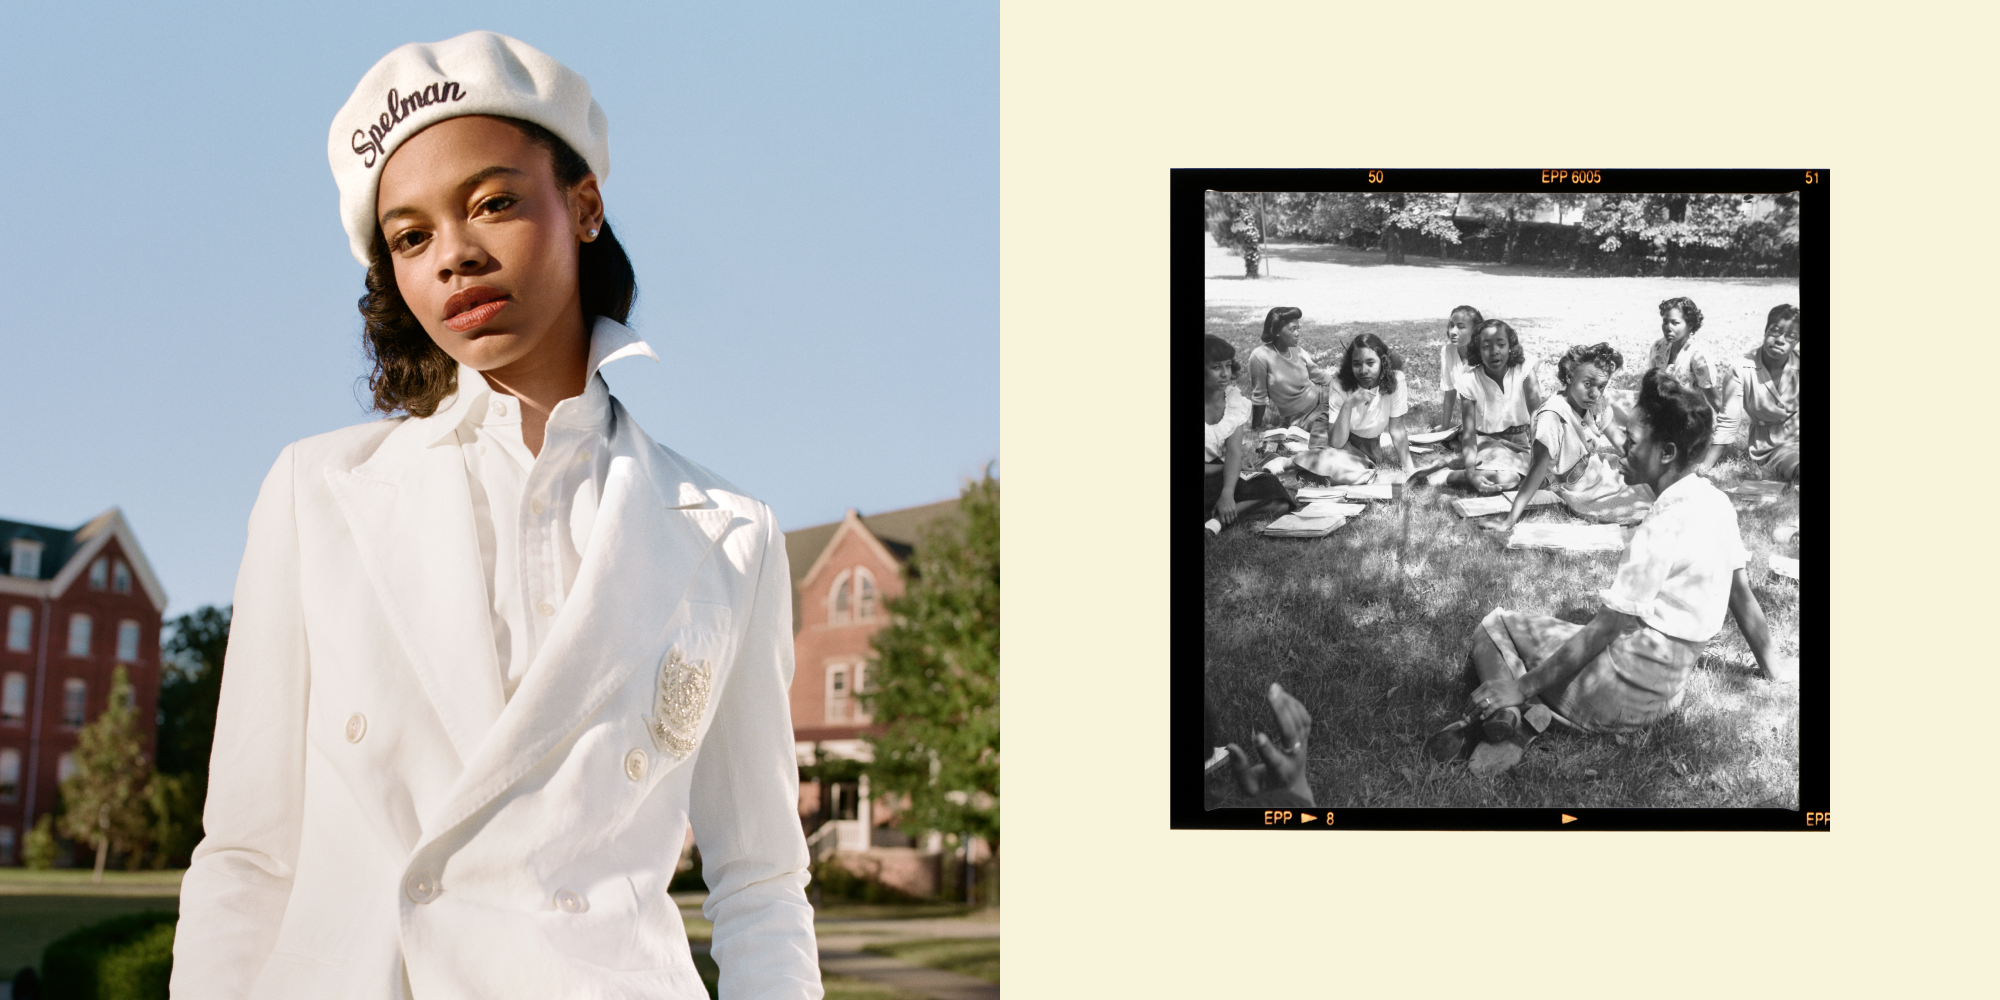 A new Ralph Lauren collection draws on the collegiate style of